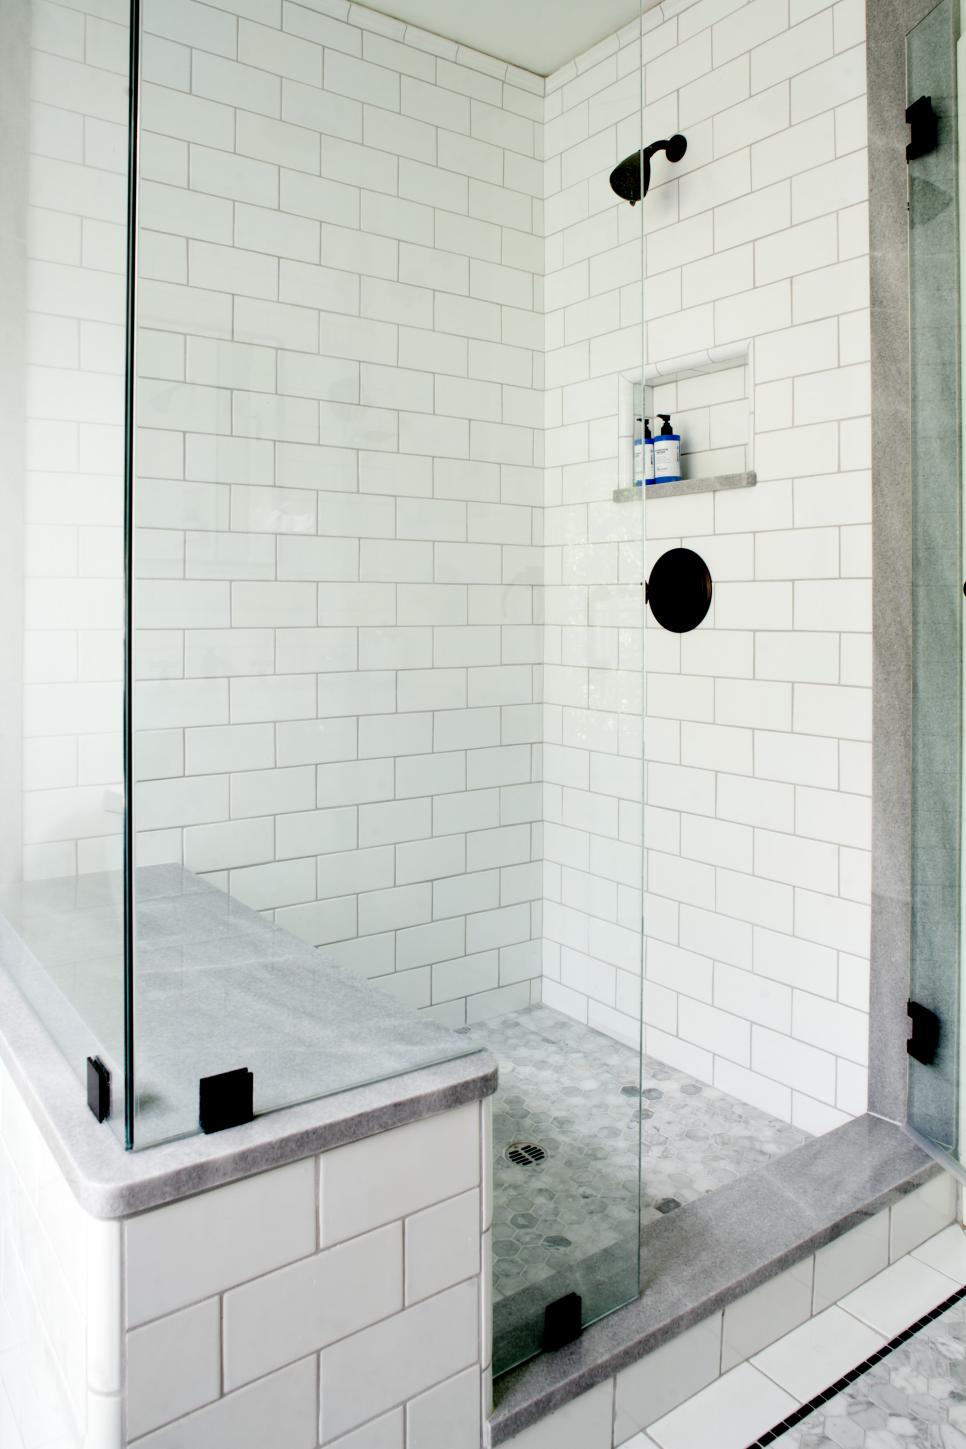 White Tile Walk-In Shower With Glass Walls and Sitting Bench | HGTV